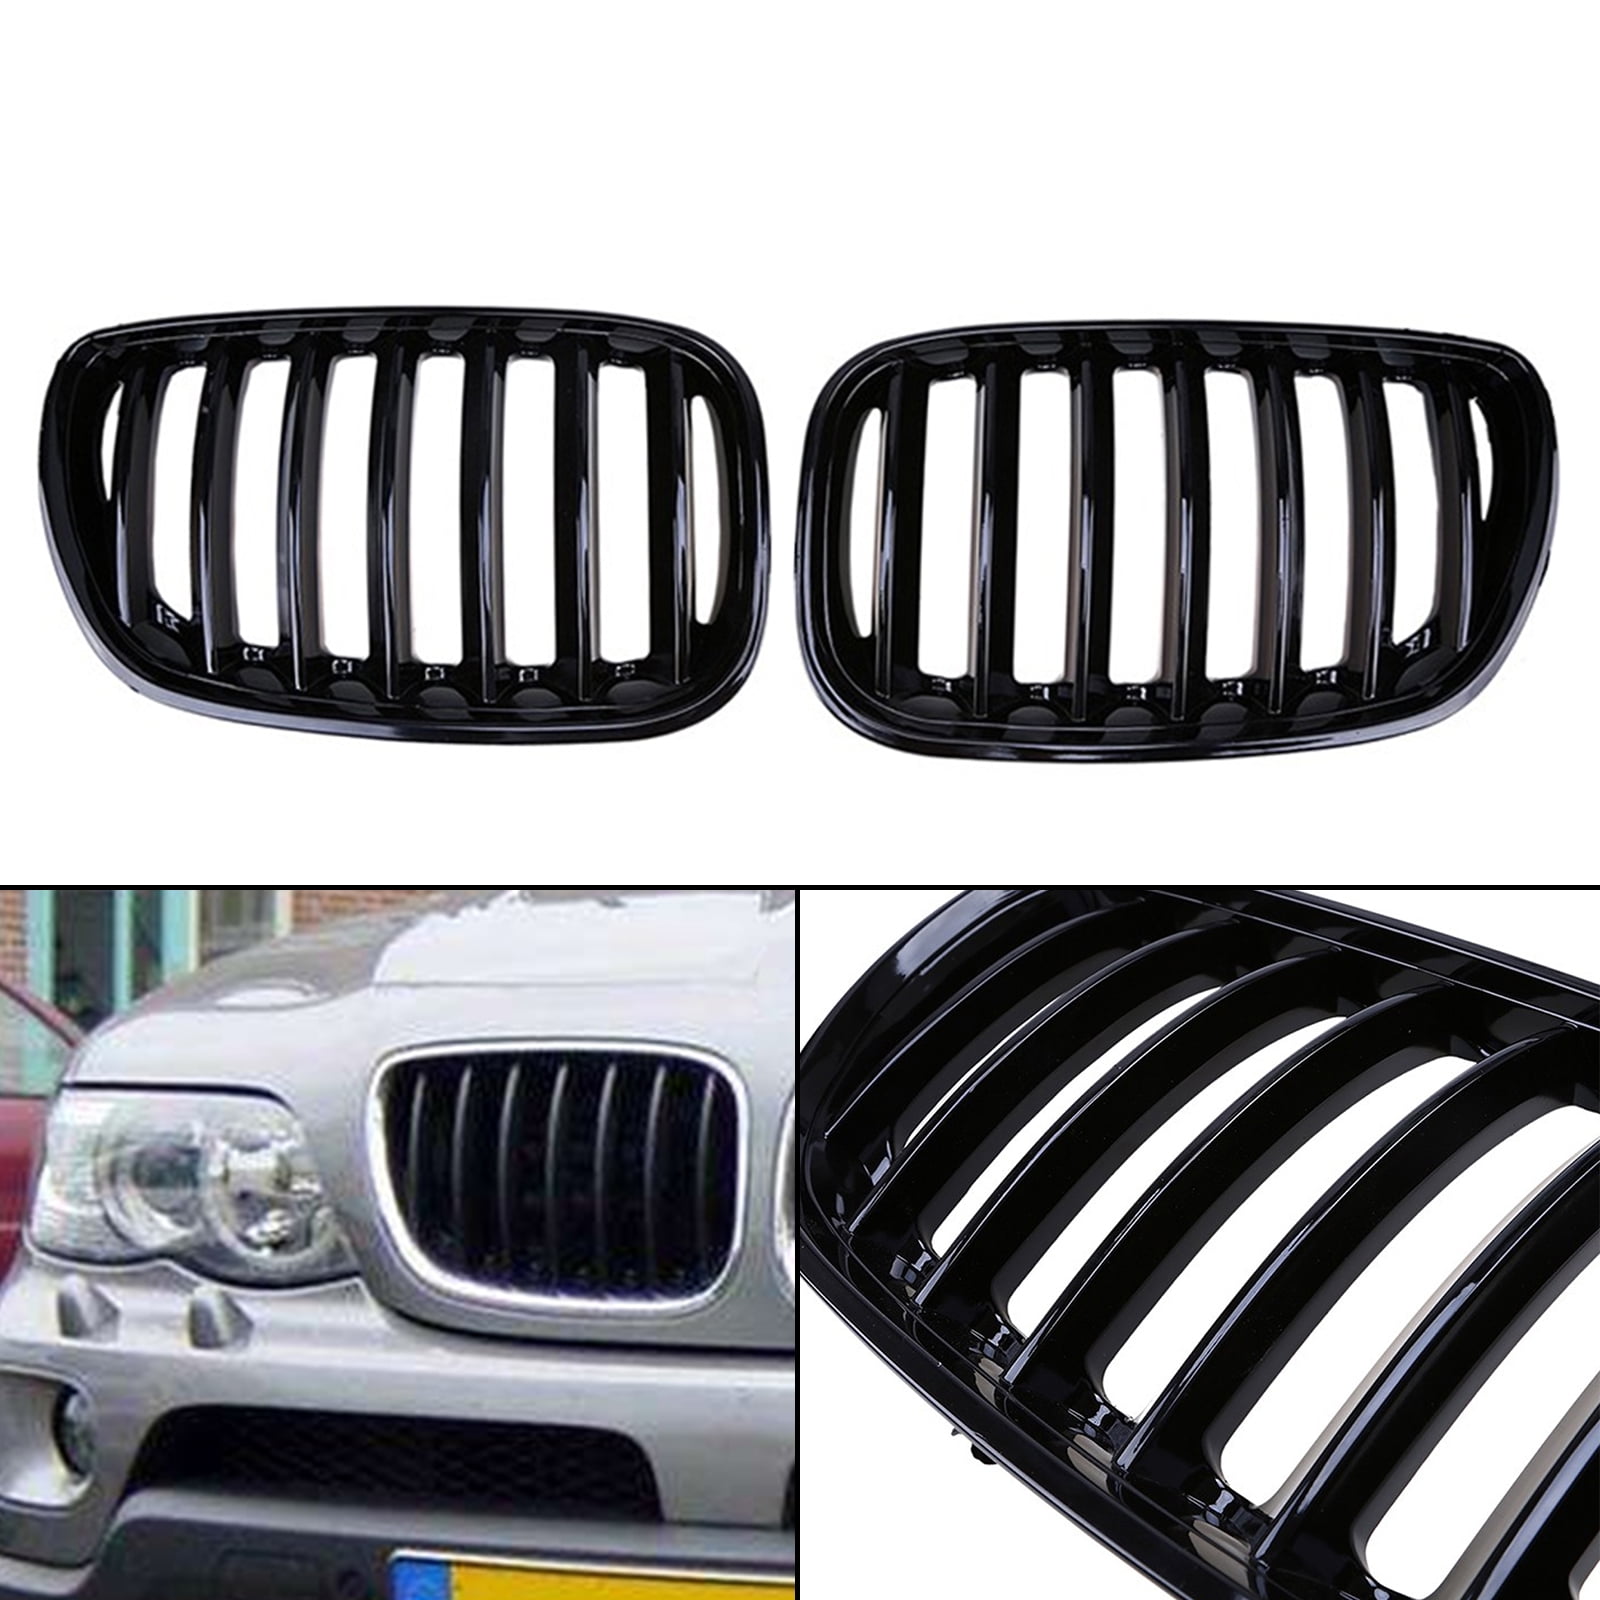 Gloss Black M-color Front Kidney Grill Grille Fit BMW X5 E53 2004-2006 X Series